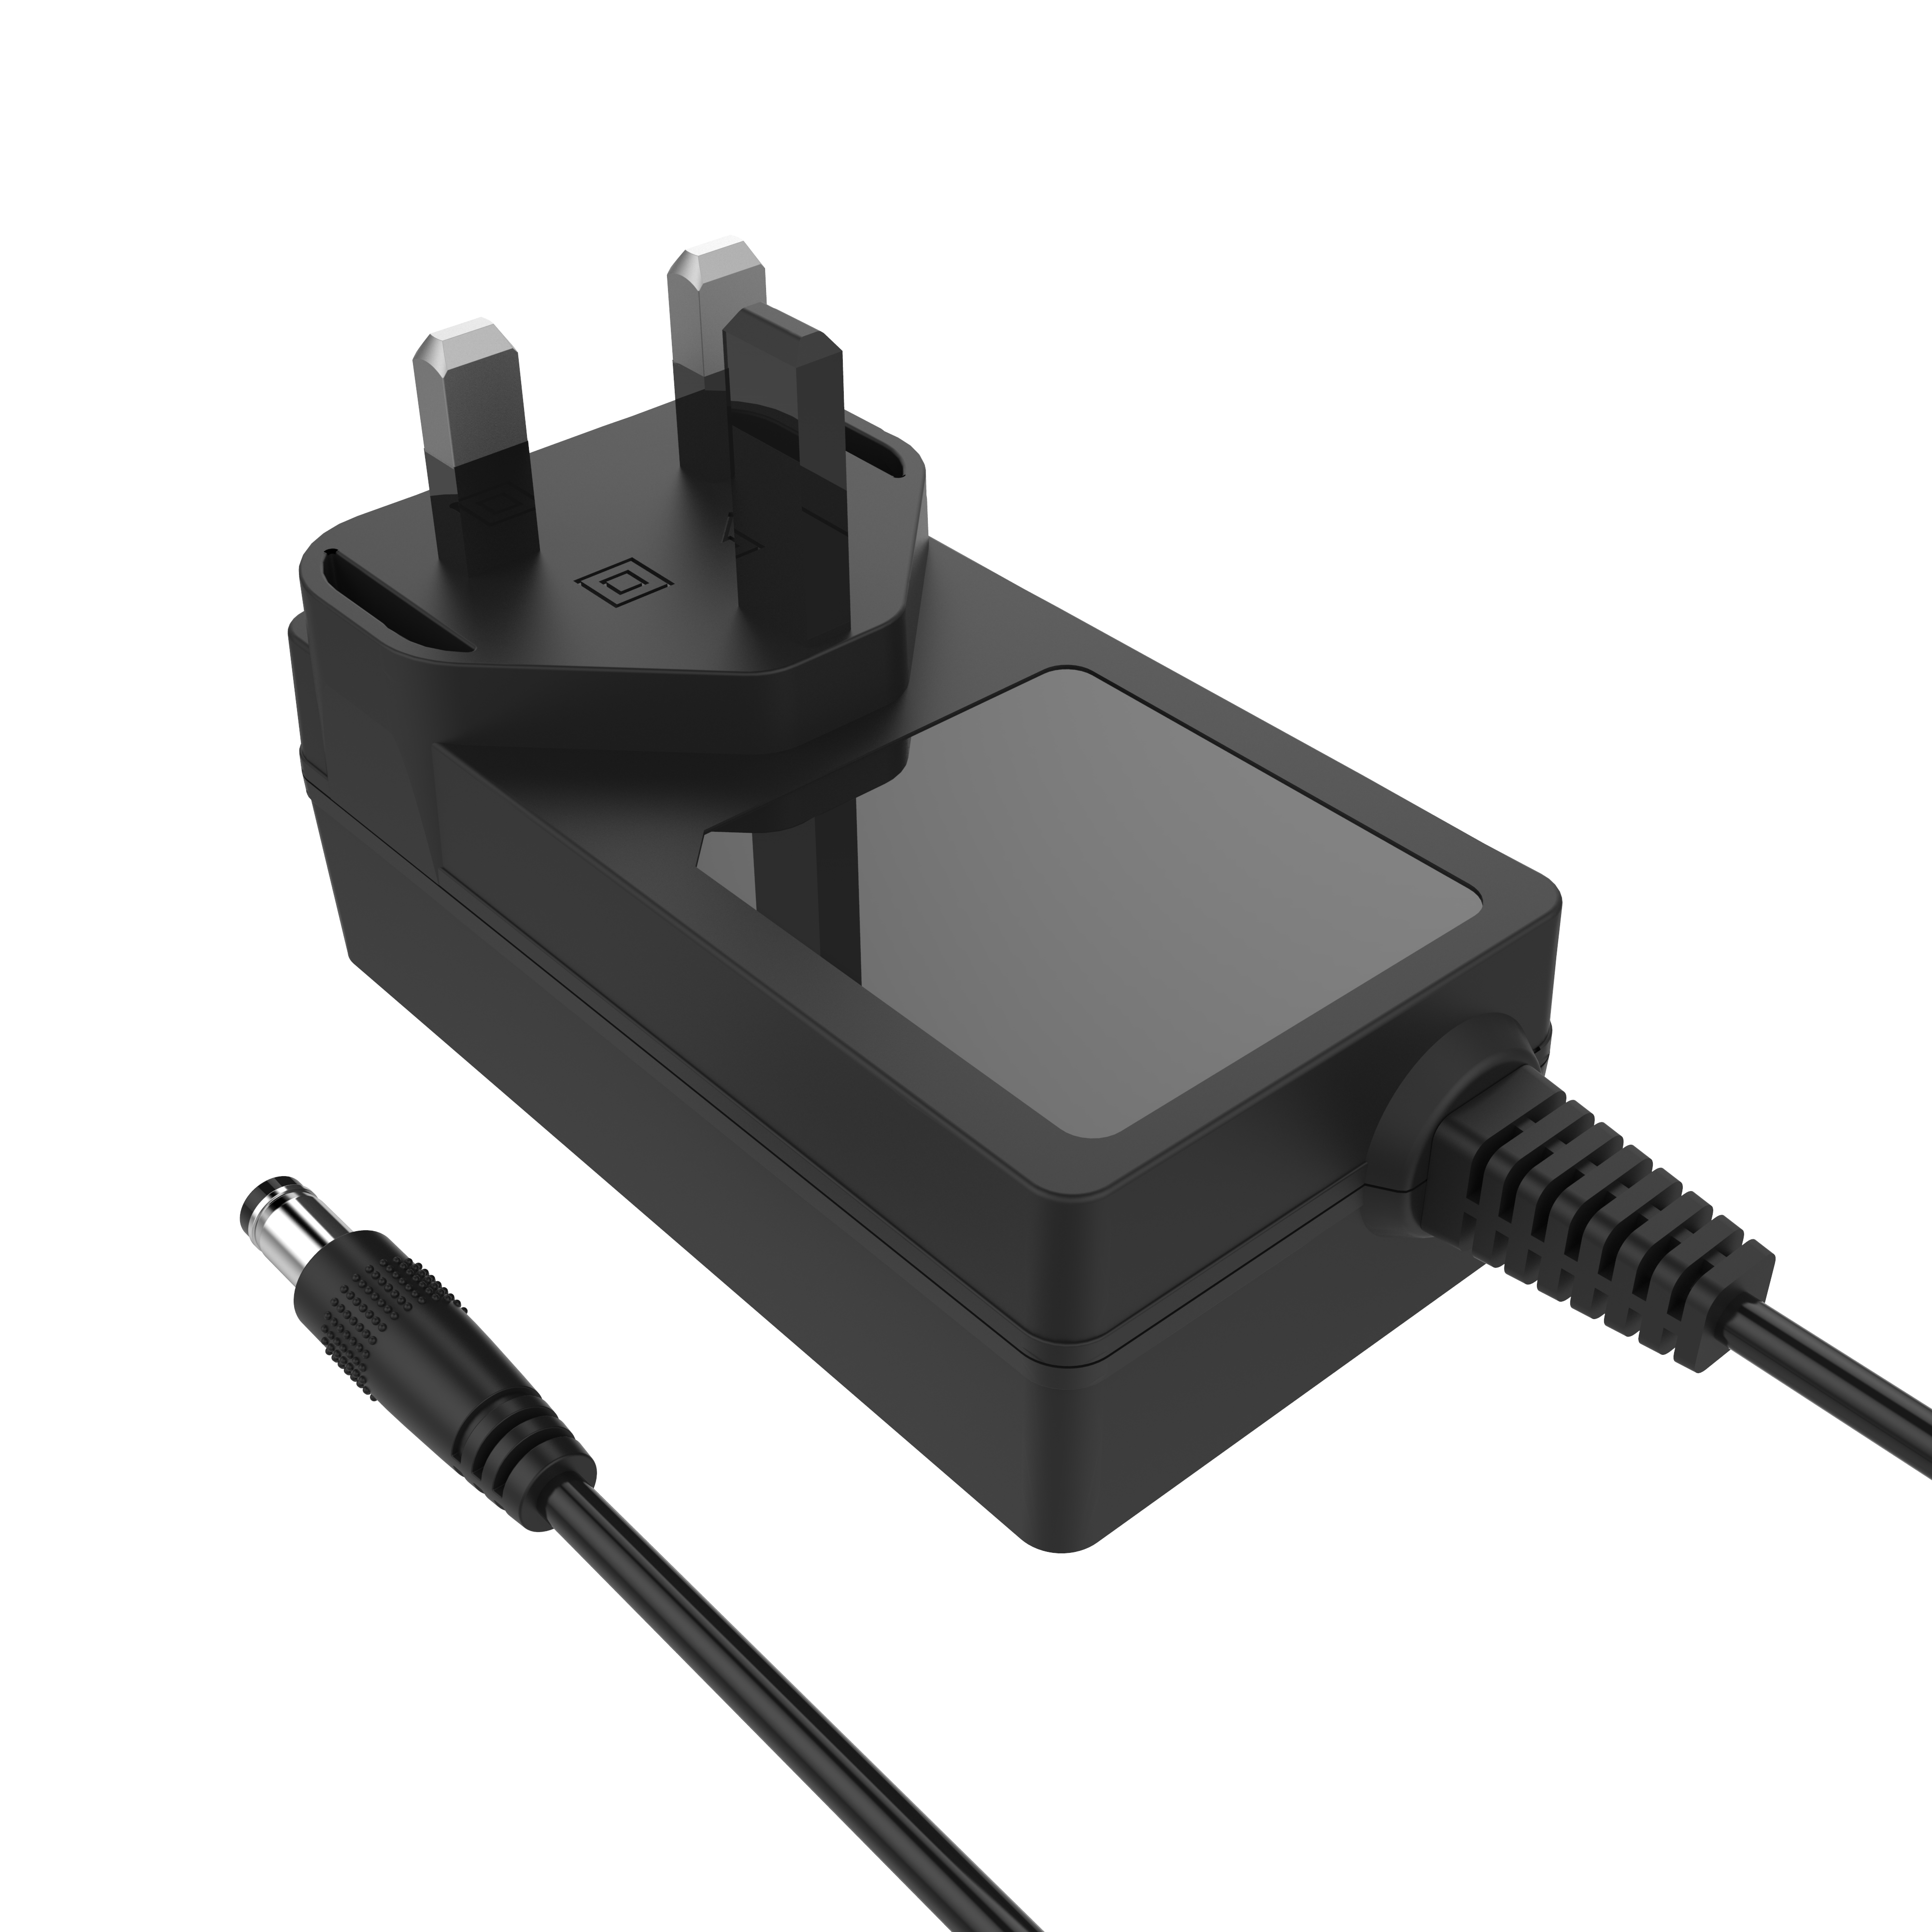 Frontpower switching adapter 24V 1.5A 15V 2.4A 12V 3A power adapter with UKCA CB for uk market